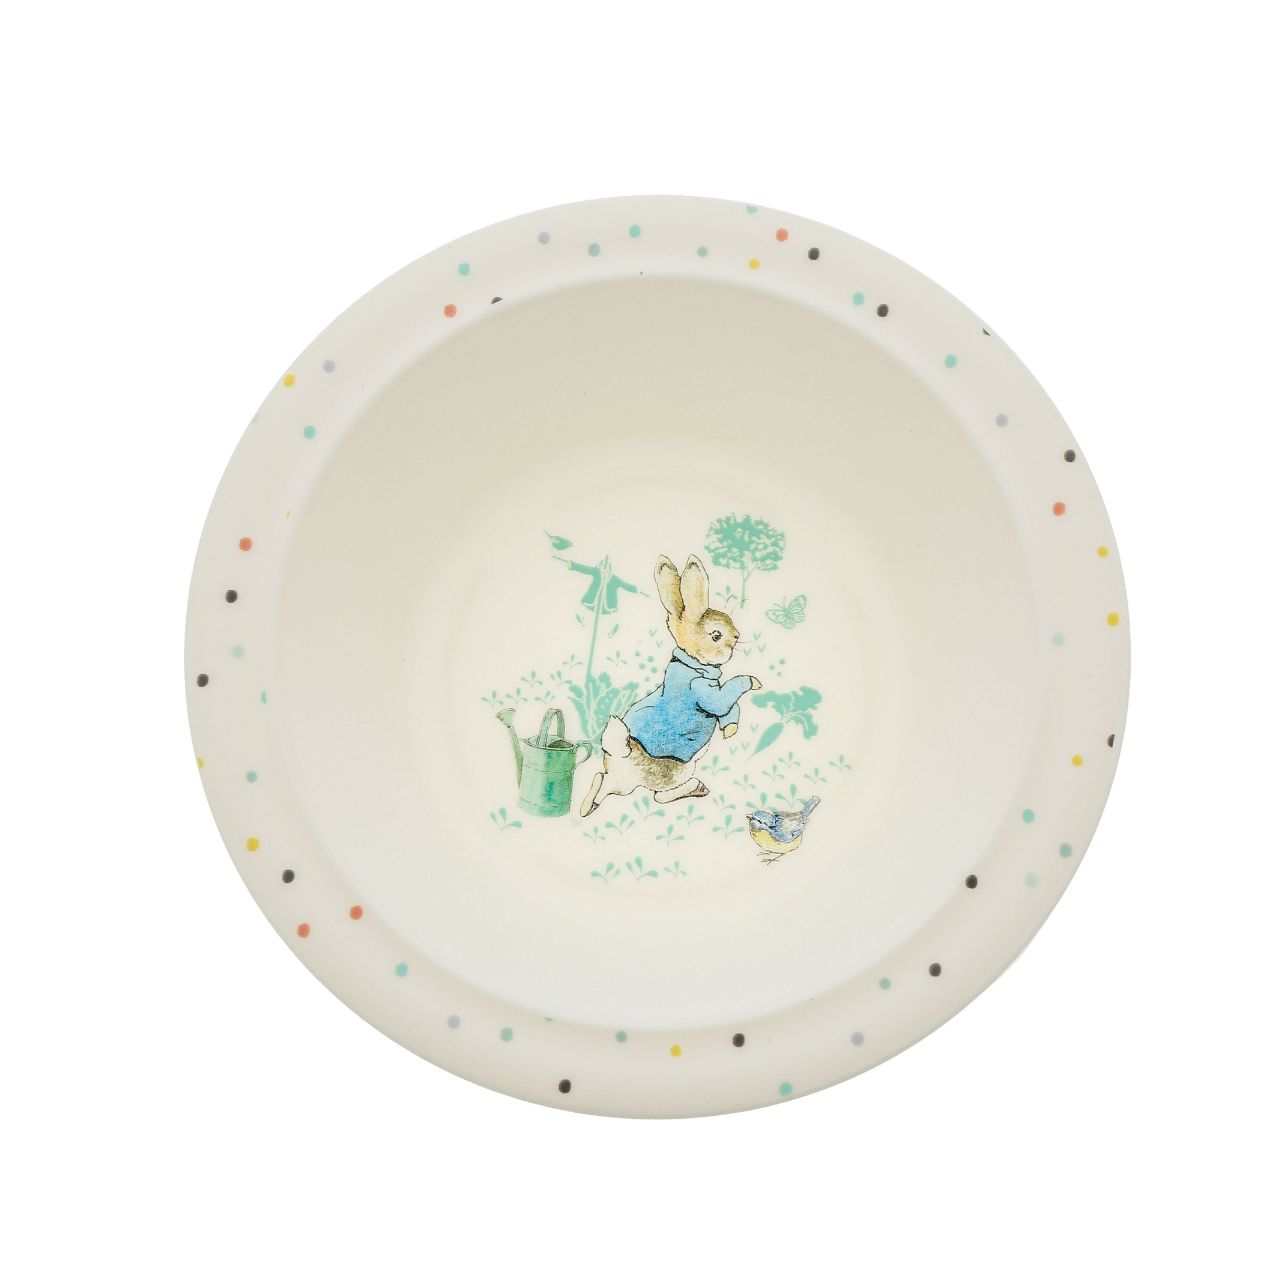 Peter Rabbit Dinner Set Beatrix Potter  Introducing this brand new at home with Peter Rabbit collection. There's nothing quite like a fun Peter Rabbit motif to entice those little tummies to clear their plates. Make mealtimes fun and practical with this dinner set. This highly durable dinner set can be used at home, in the garden, or on the go.